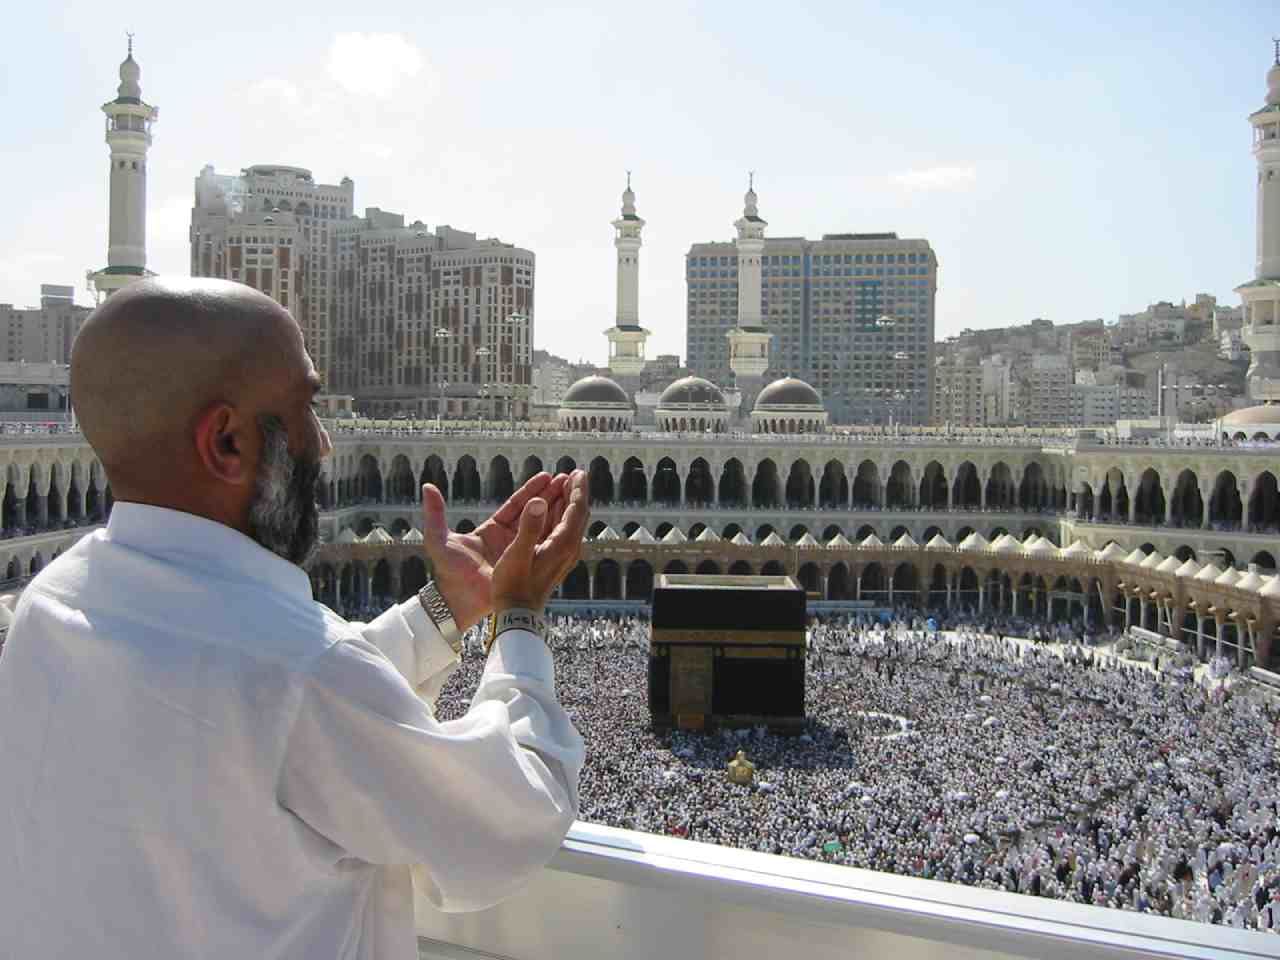 Haj Committee of India Announces Commencement of Haj Application